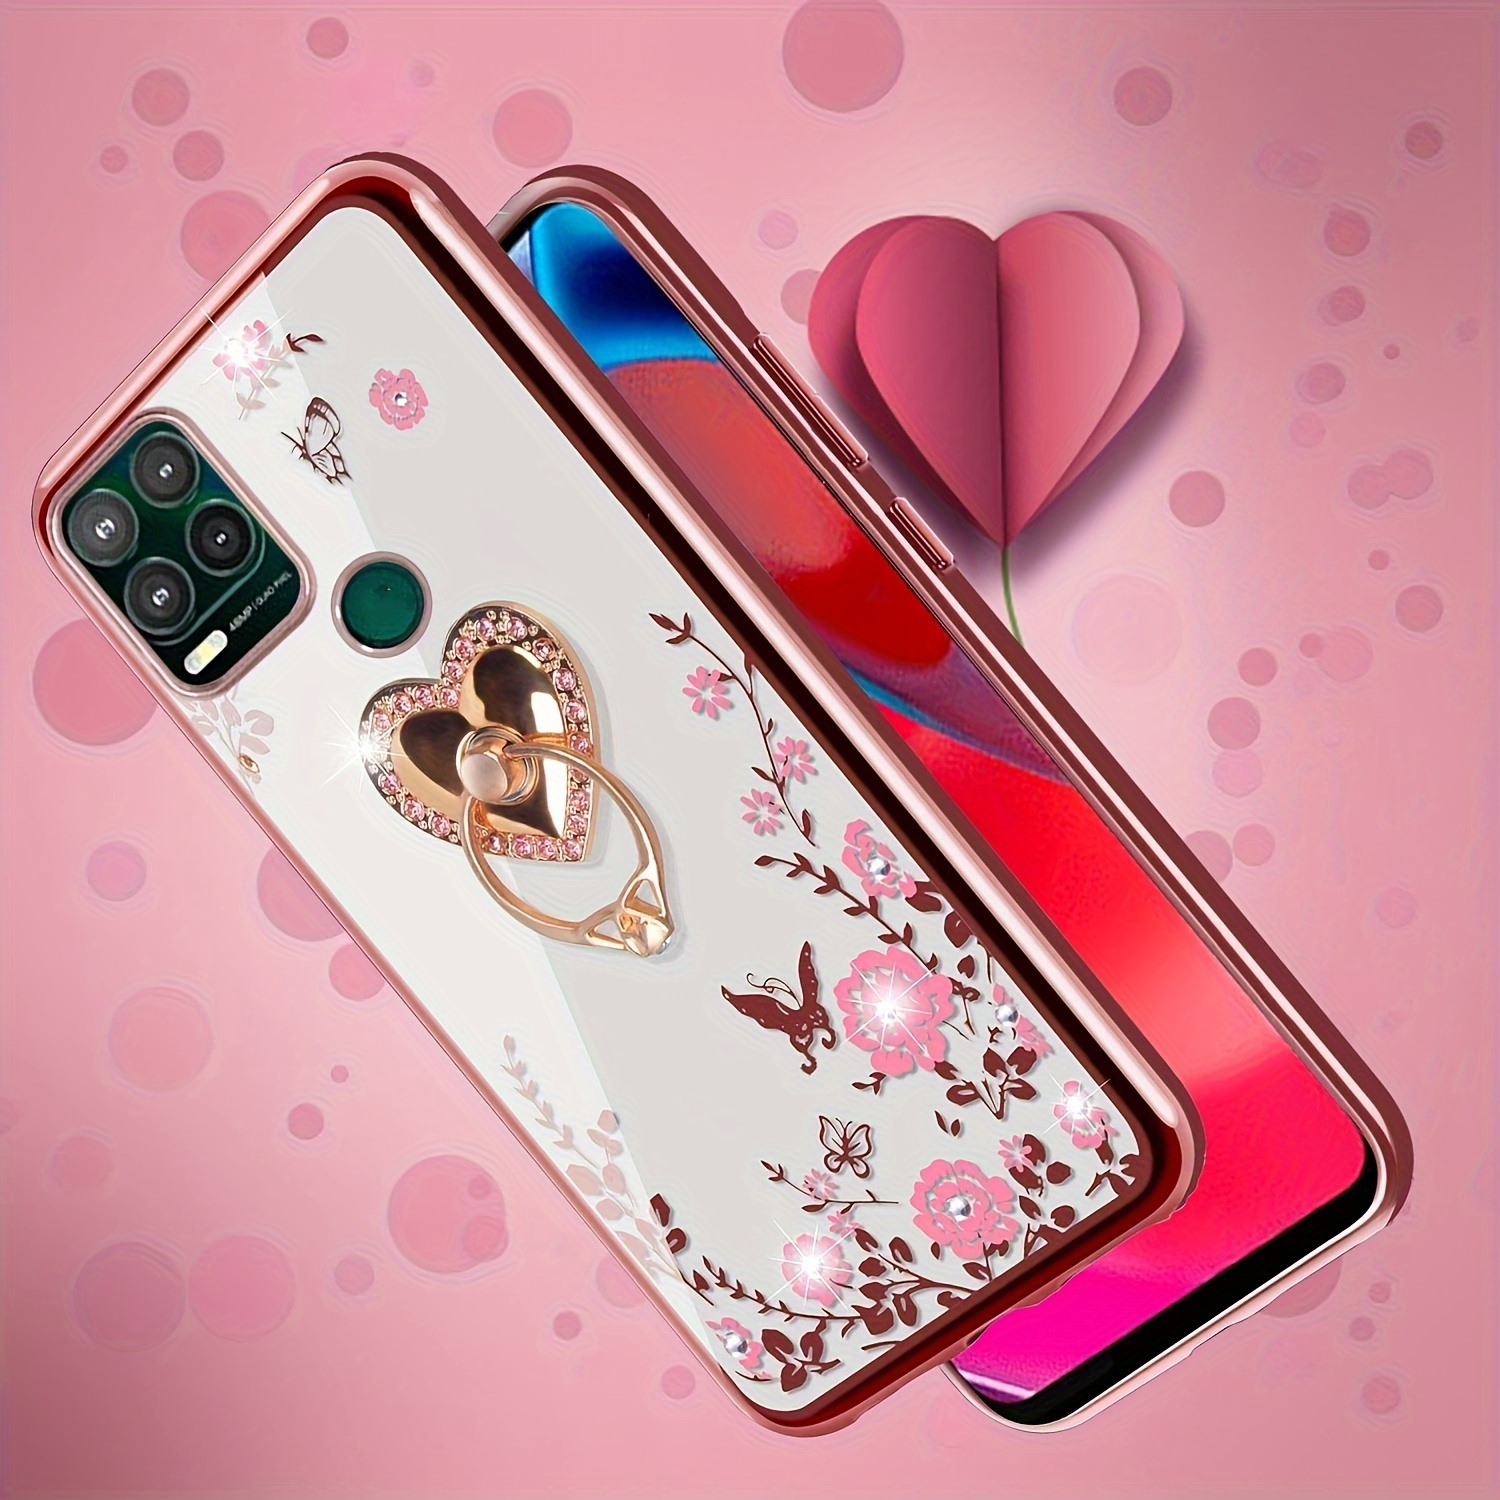  for Moto G Stylus 5G Case for Women, Motorola G Stylus 5G Case  Glitter Crystal Butterfly Heart Floral Slim TPU Luxury Bling Cute  Protective Cover with Kickstand+Strap for Moto G Stylus